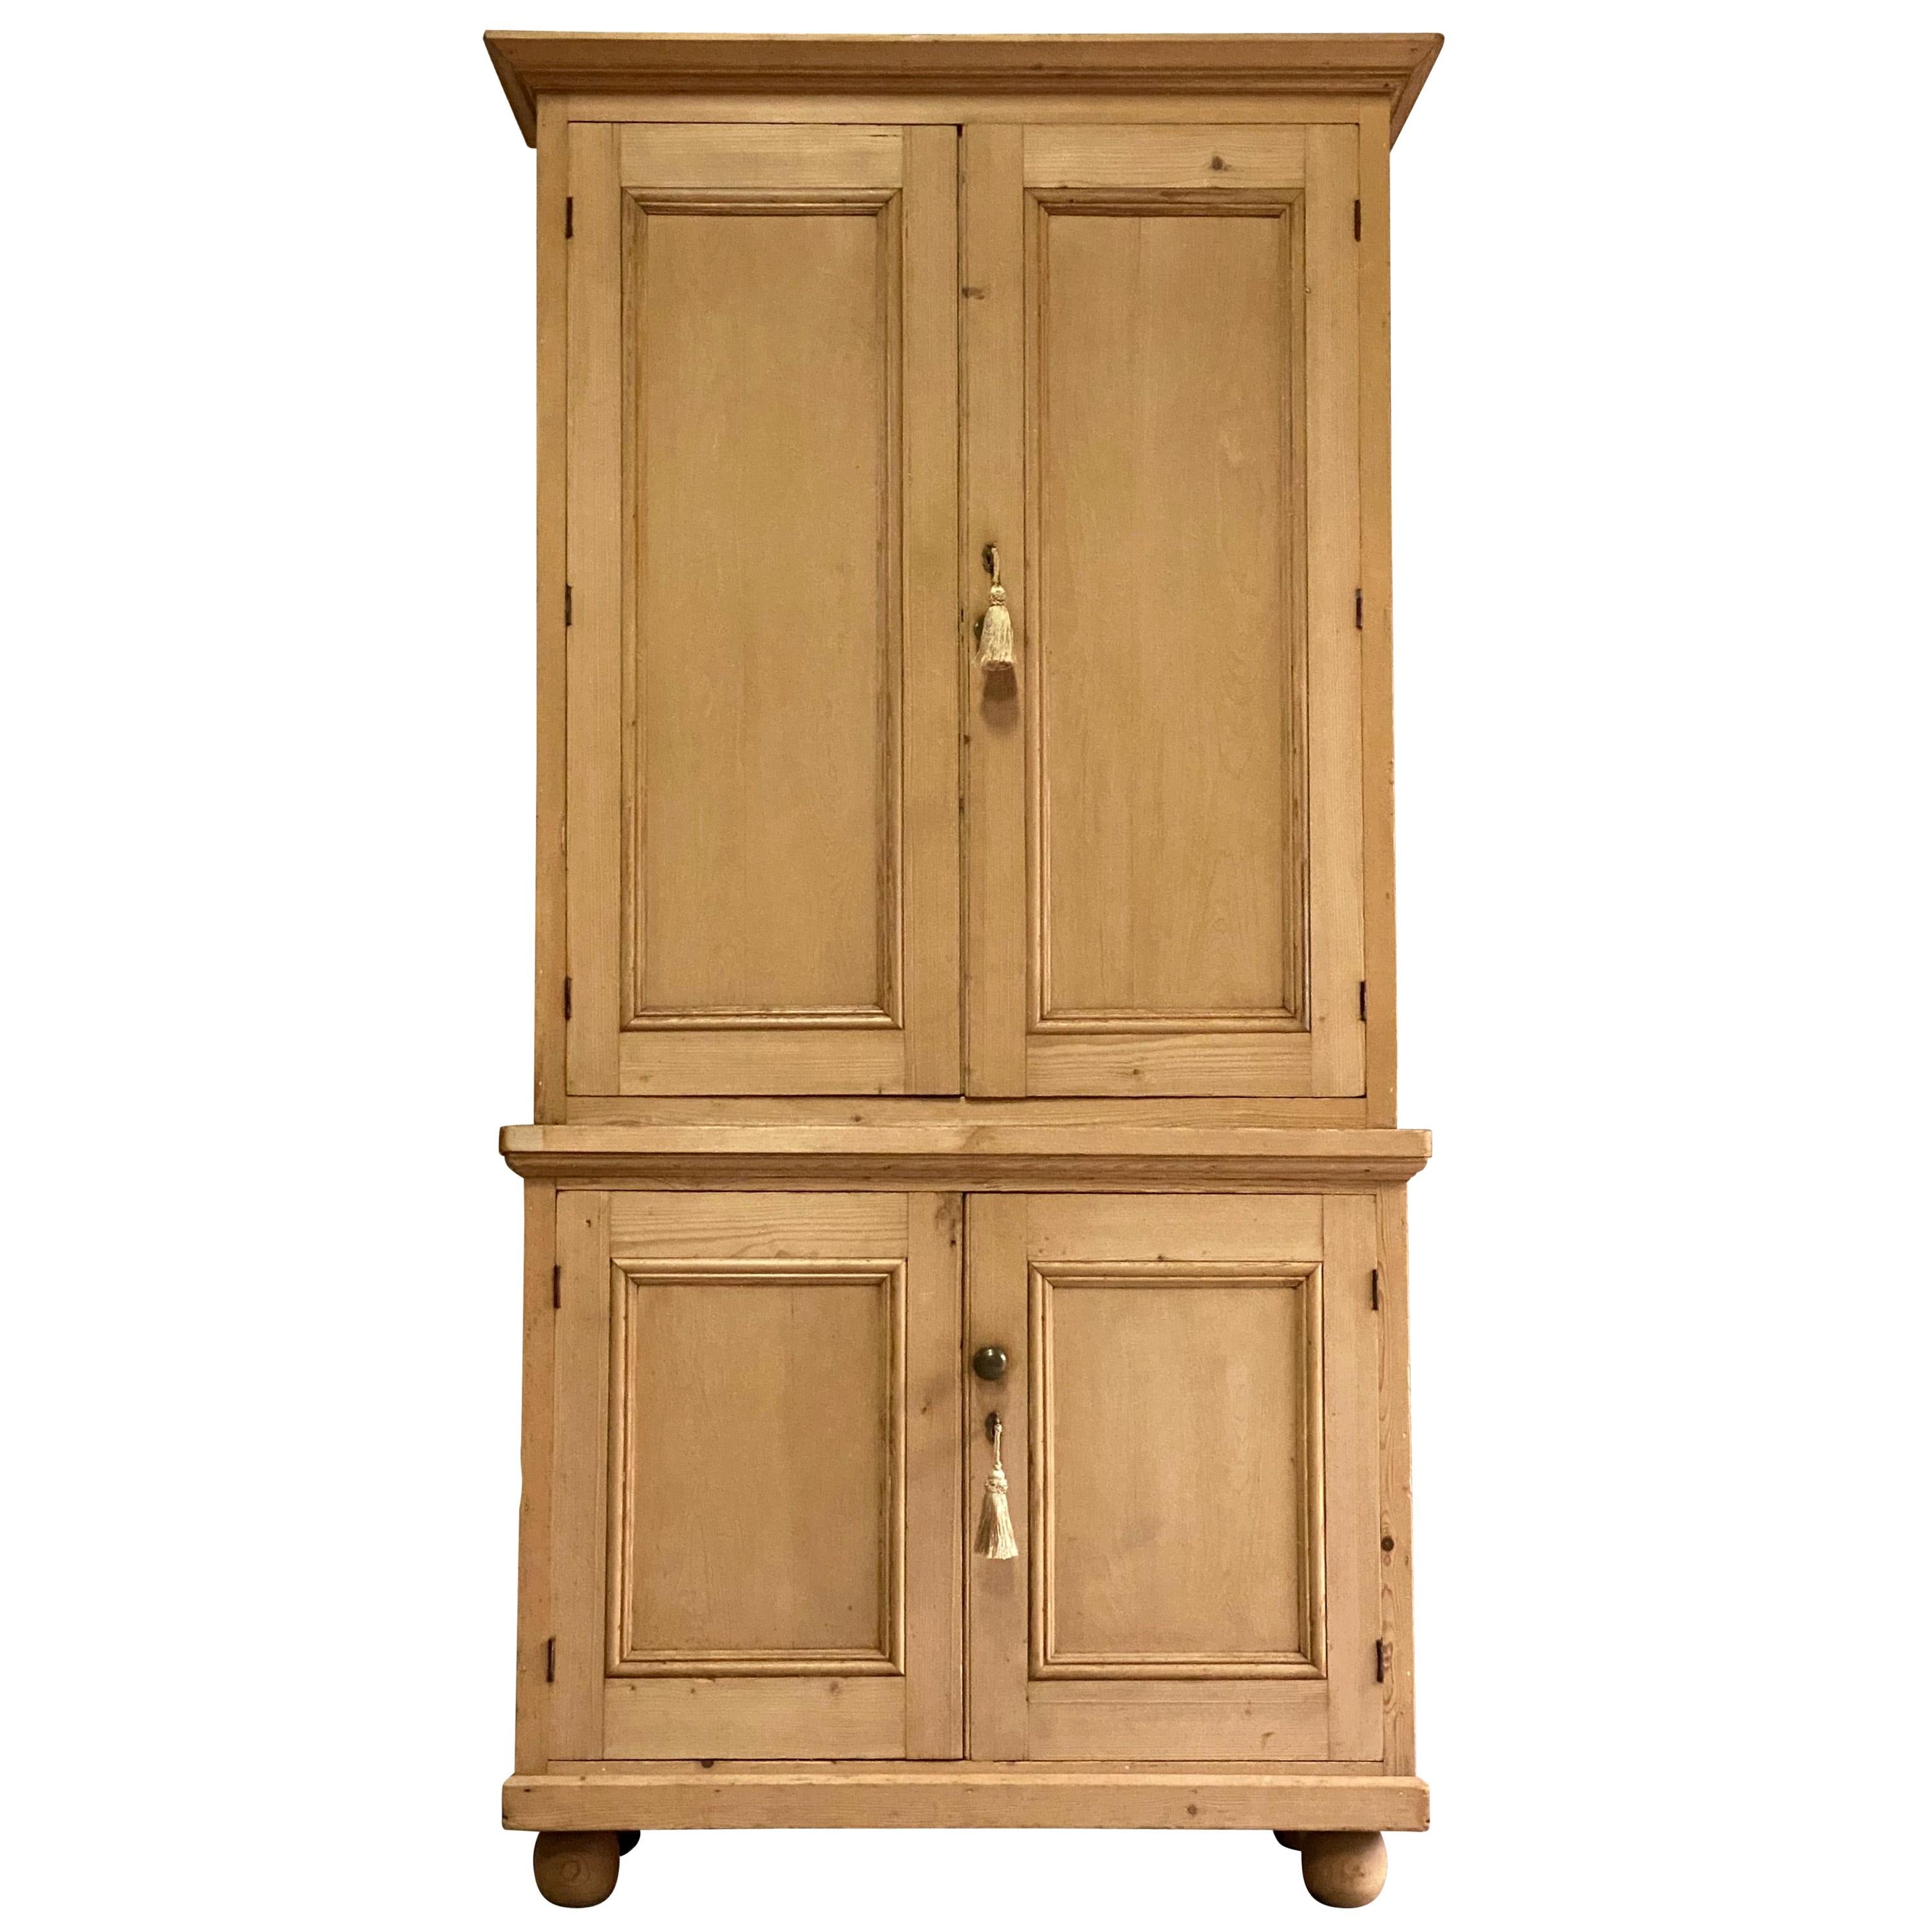 Victorian Pine Housekeepers Cupboard Pantry Antique, 19th Century, circa 1890 